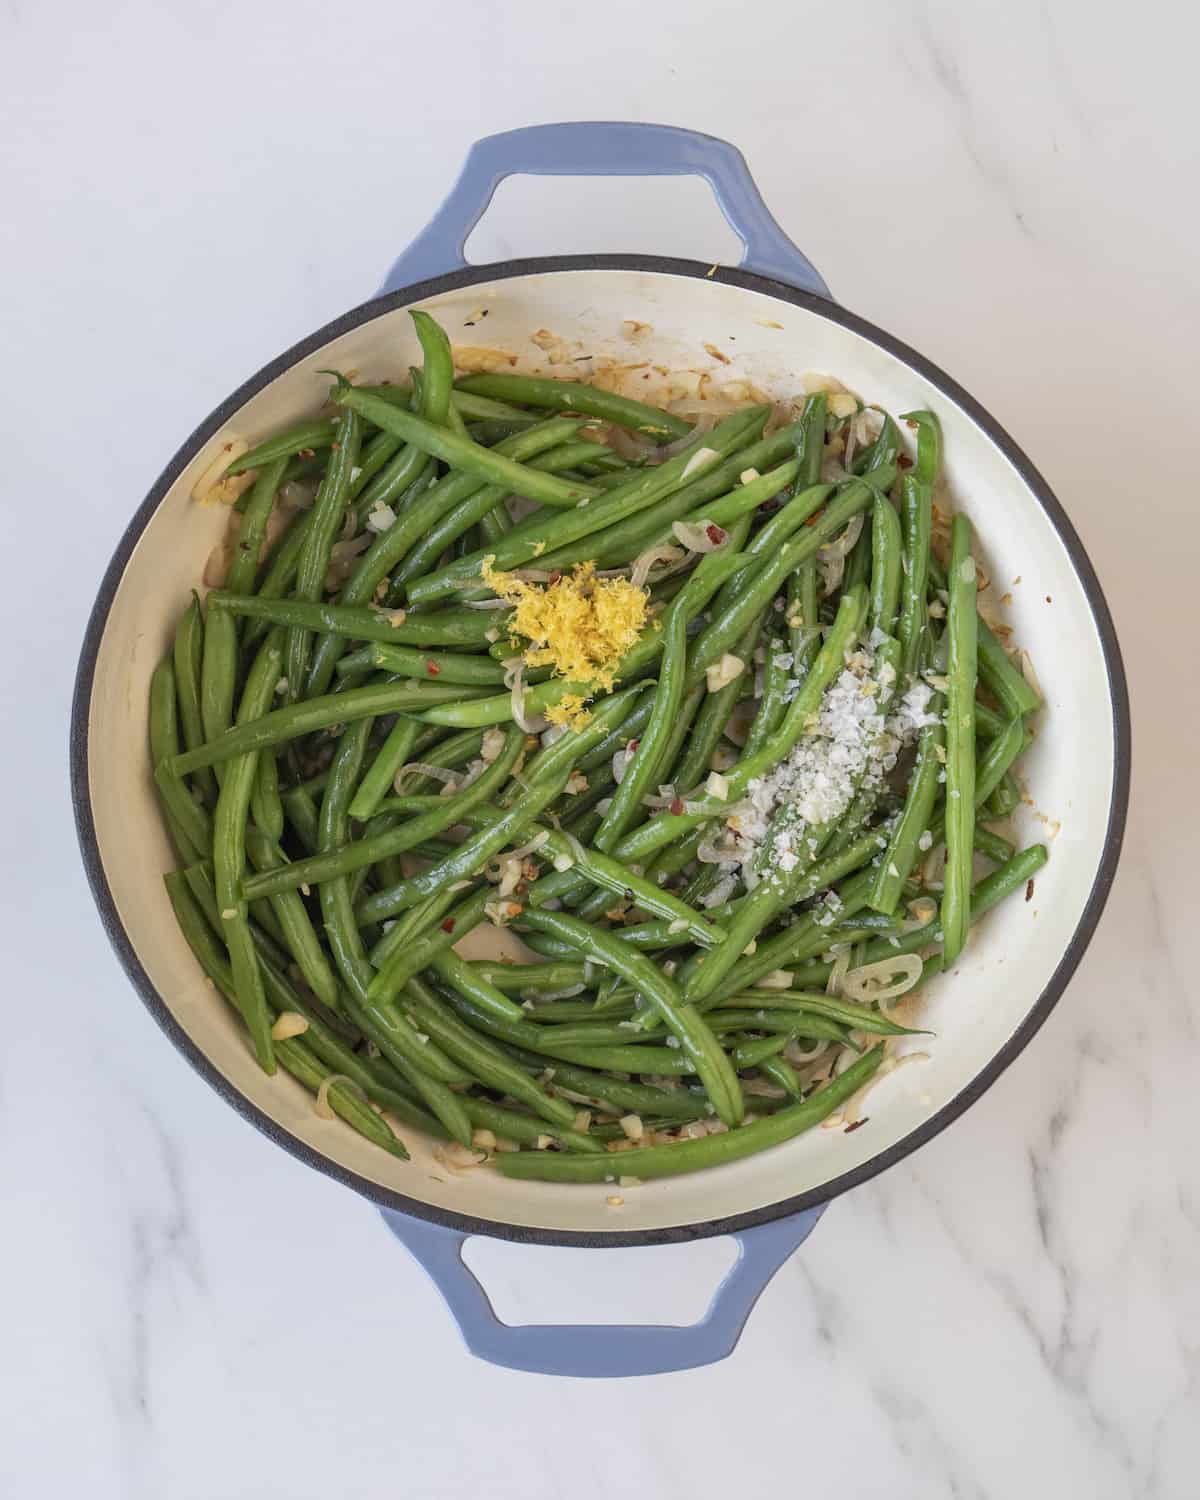 Shallot, garlic cloves, red pepper flakes, green beans, lemon zest, and flaky salt in a blue skillet on a white countertop.